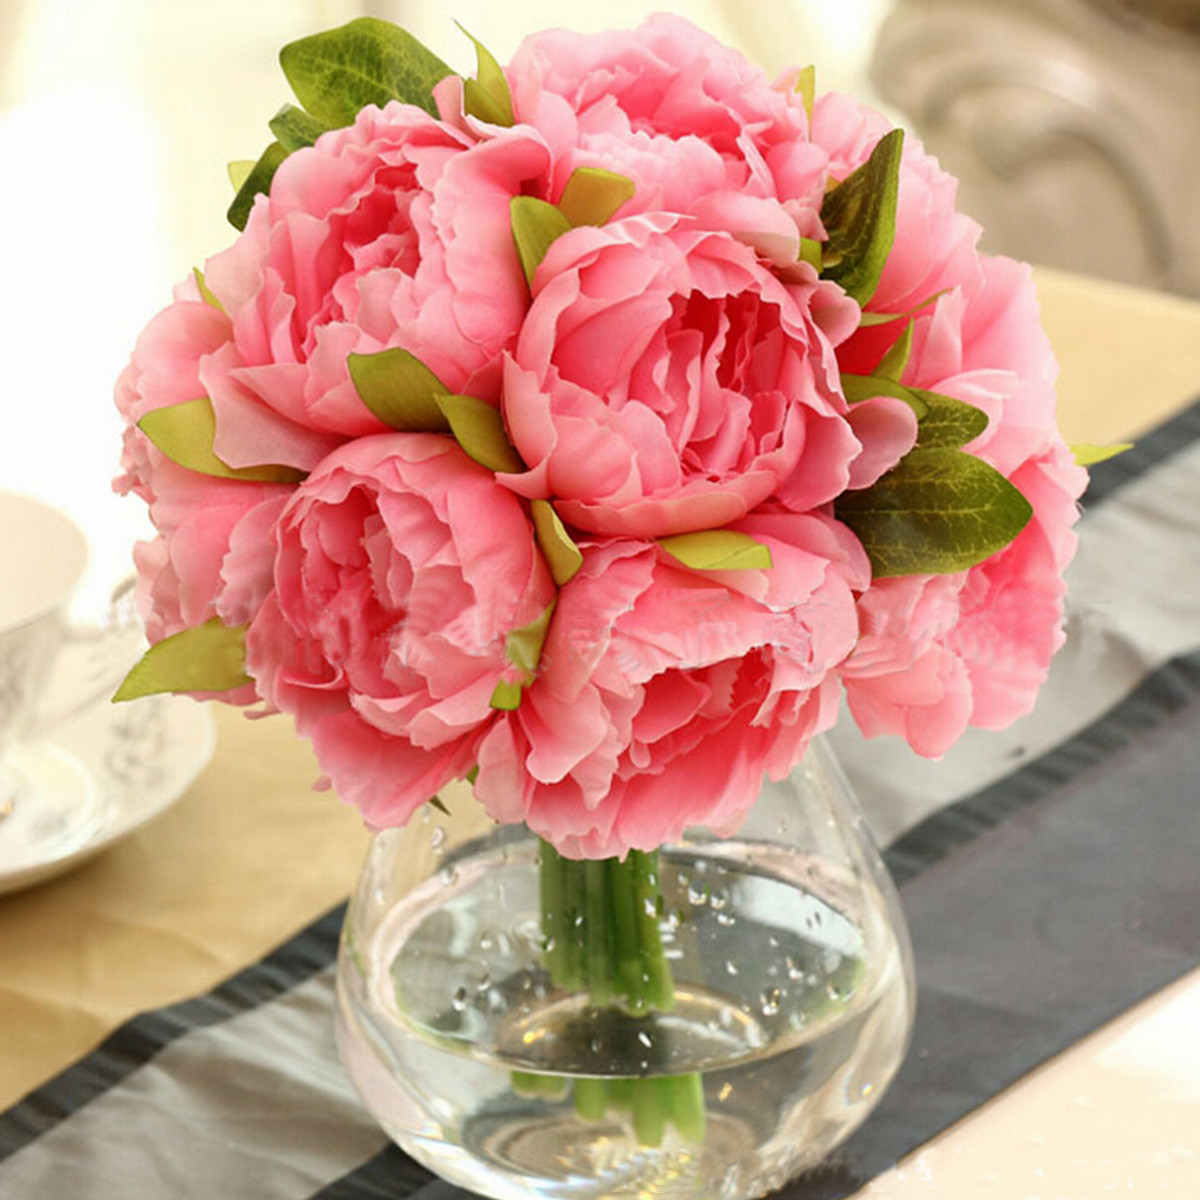 10-Heads-Artificial-Silk-Flower-Peony-Wedding-Bouquet-Party-Home-Decoration-1036707